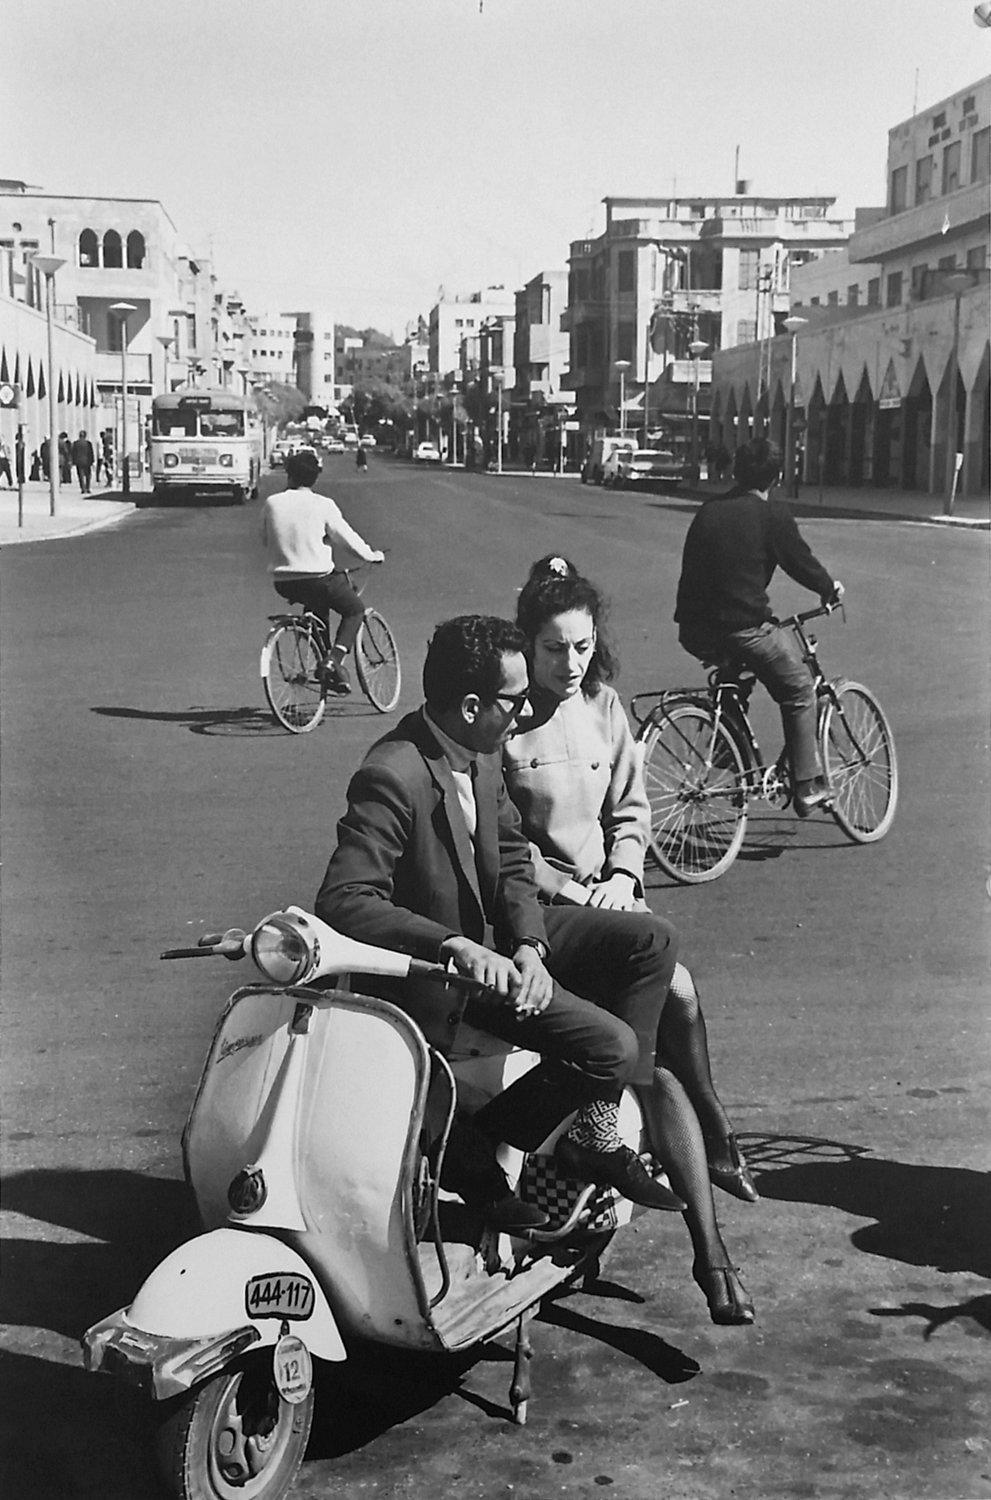 Leonard Freed photographed a couple on a scooter in Tel Aviv in 1968.